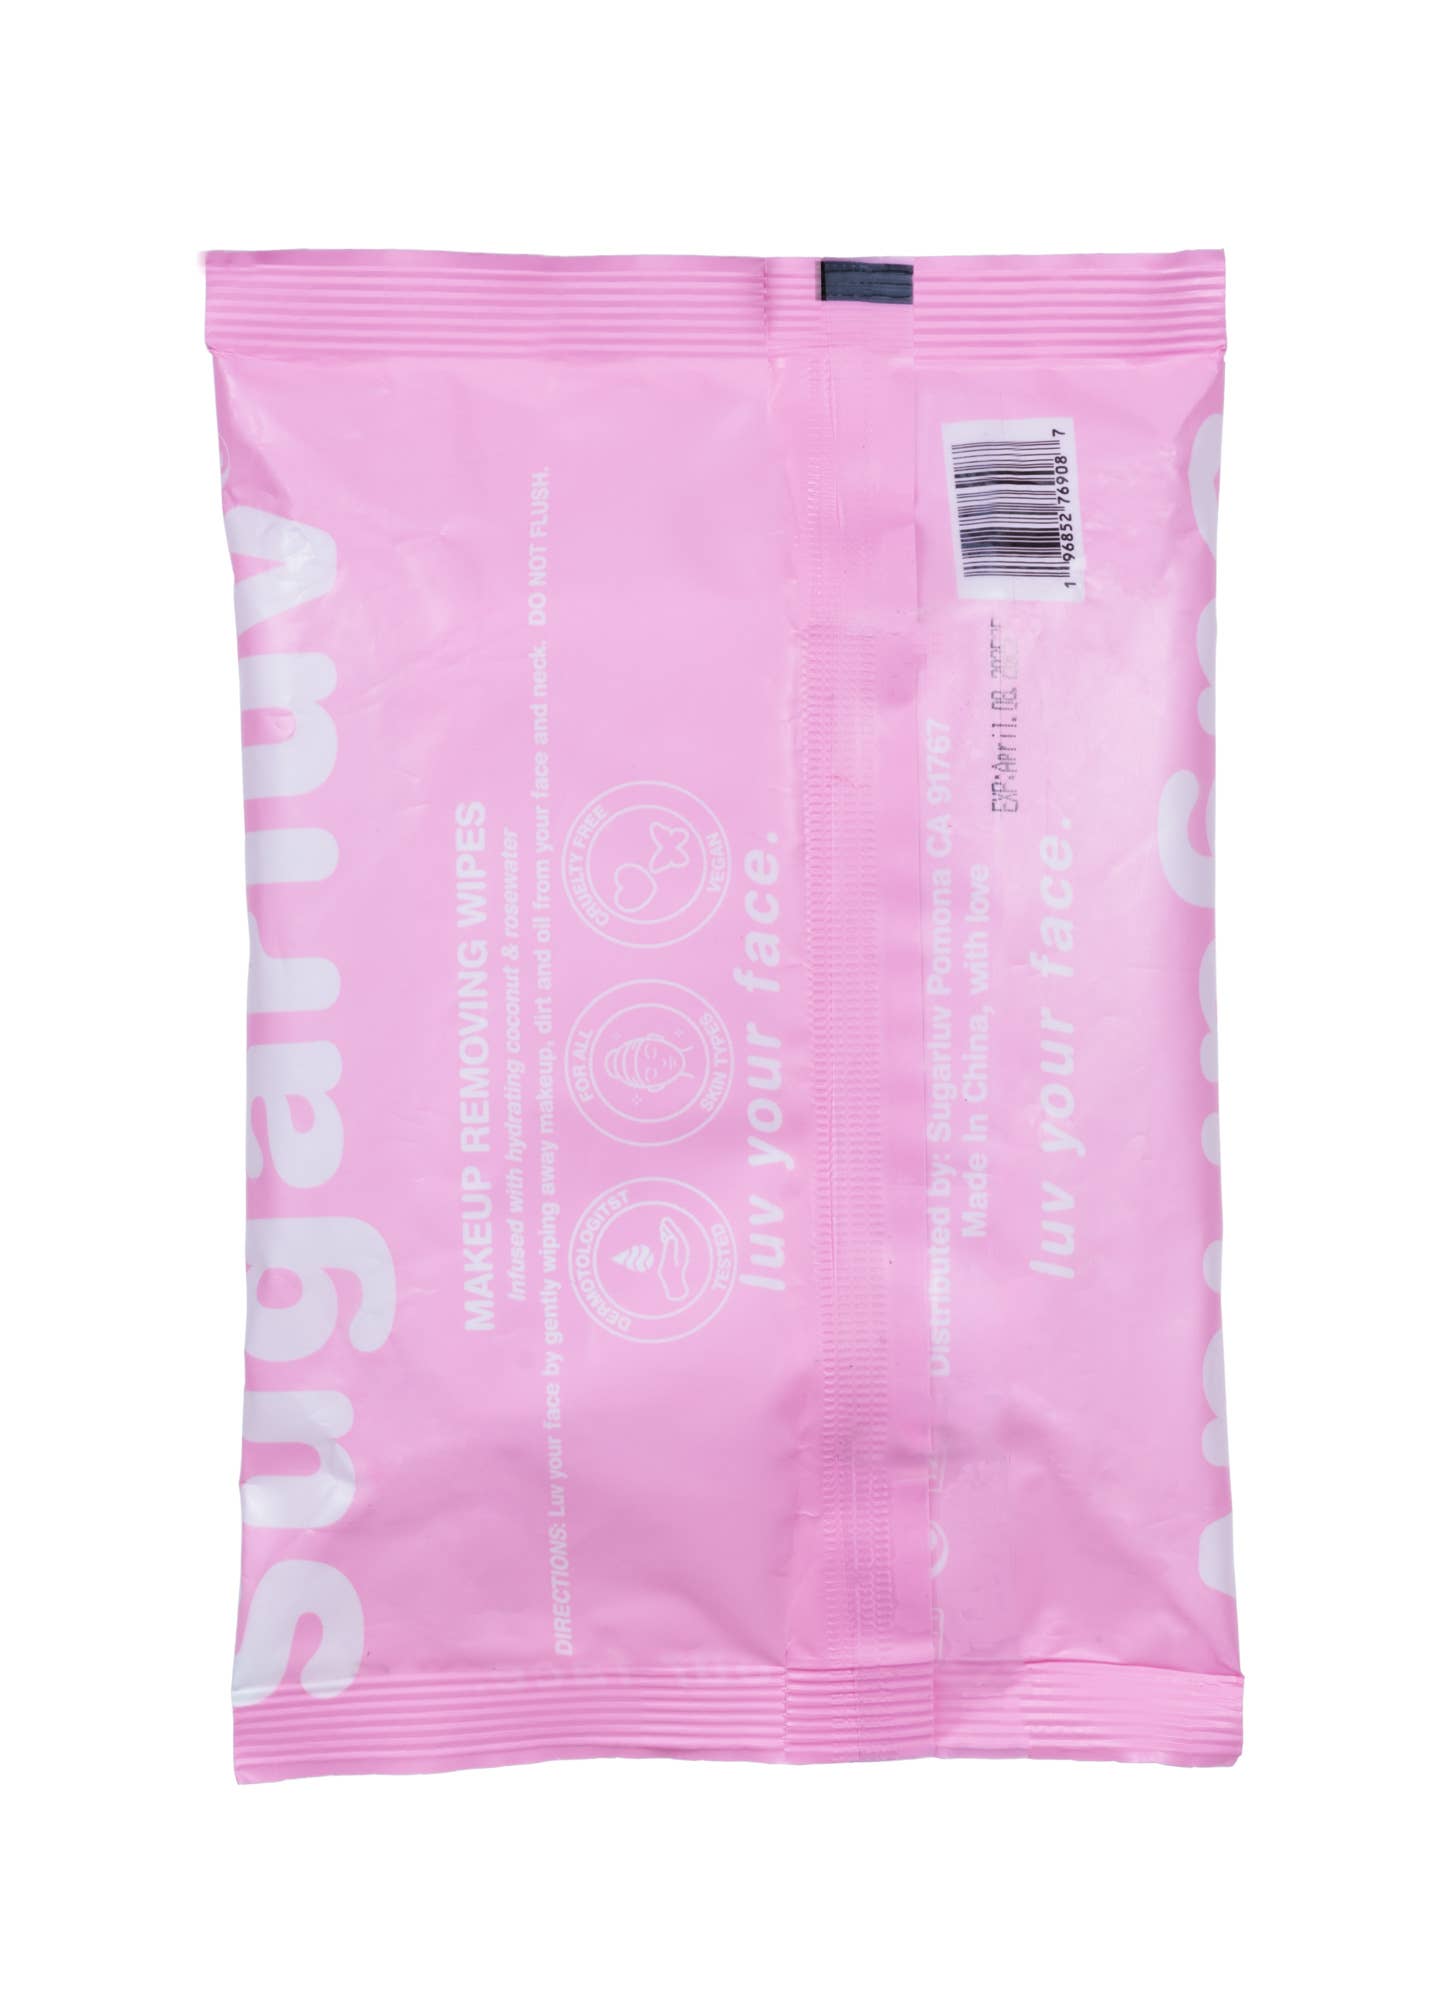 Makeup Remover Cleansing Wipes - Coconut/Rosewater 30 Count